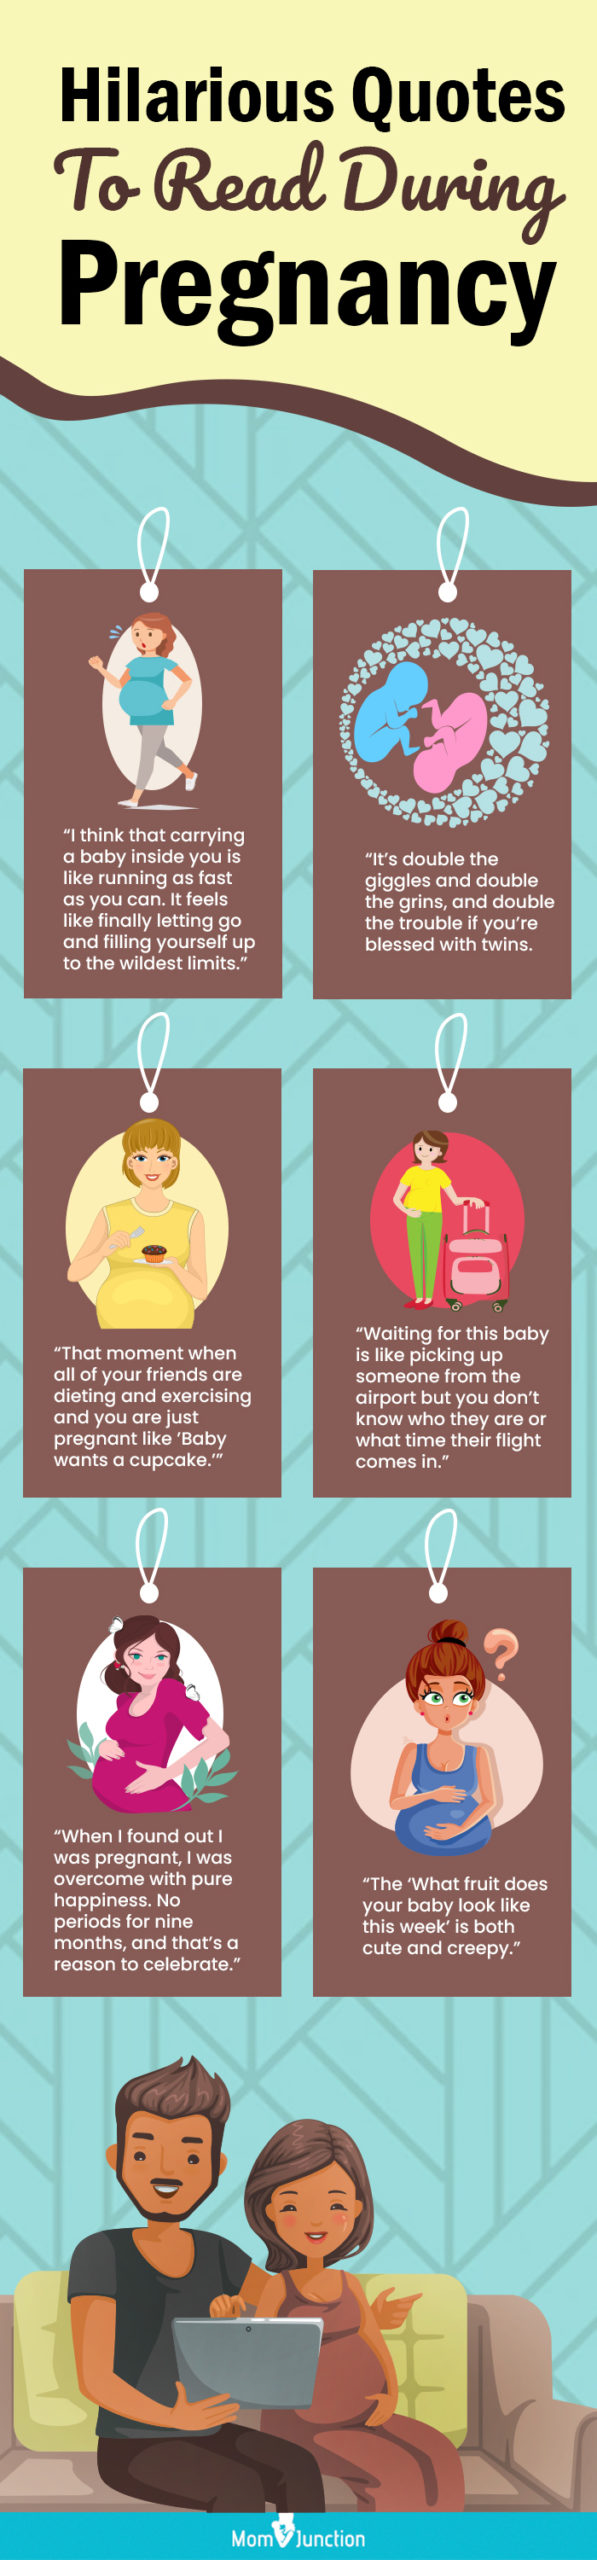 hilarious quotes to read during pregnancy (infographic)